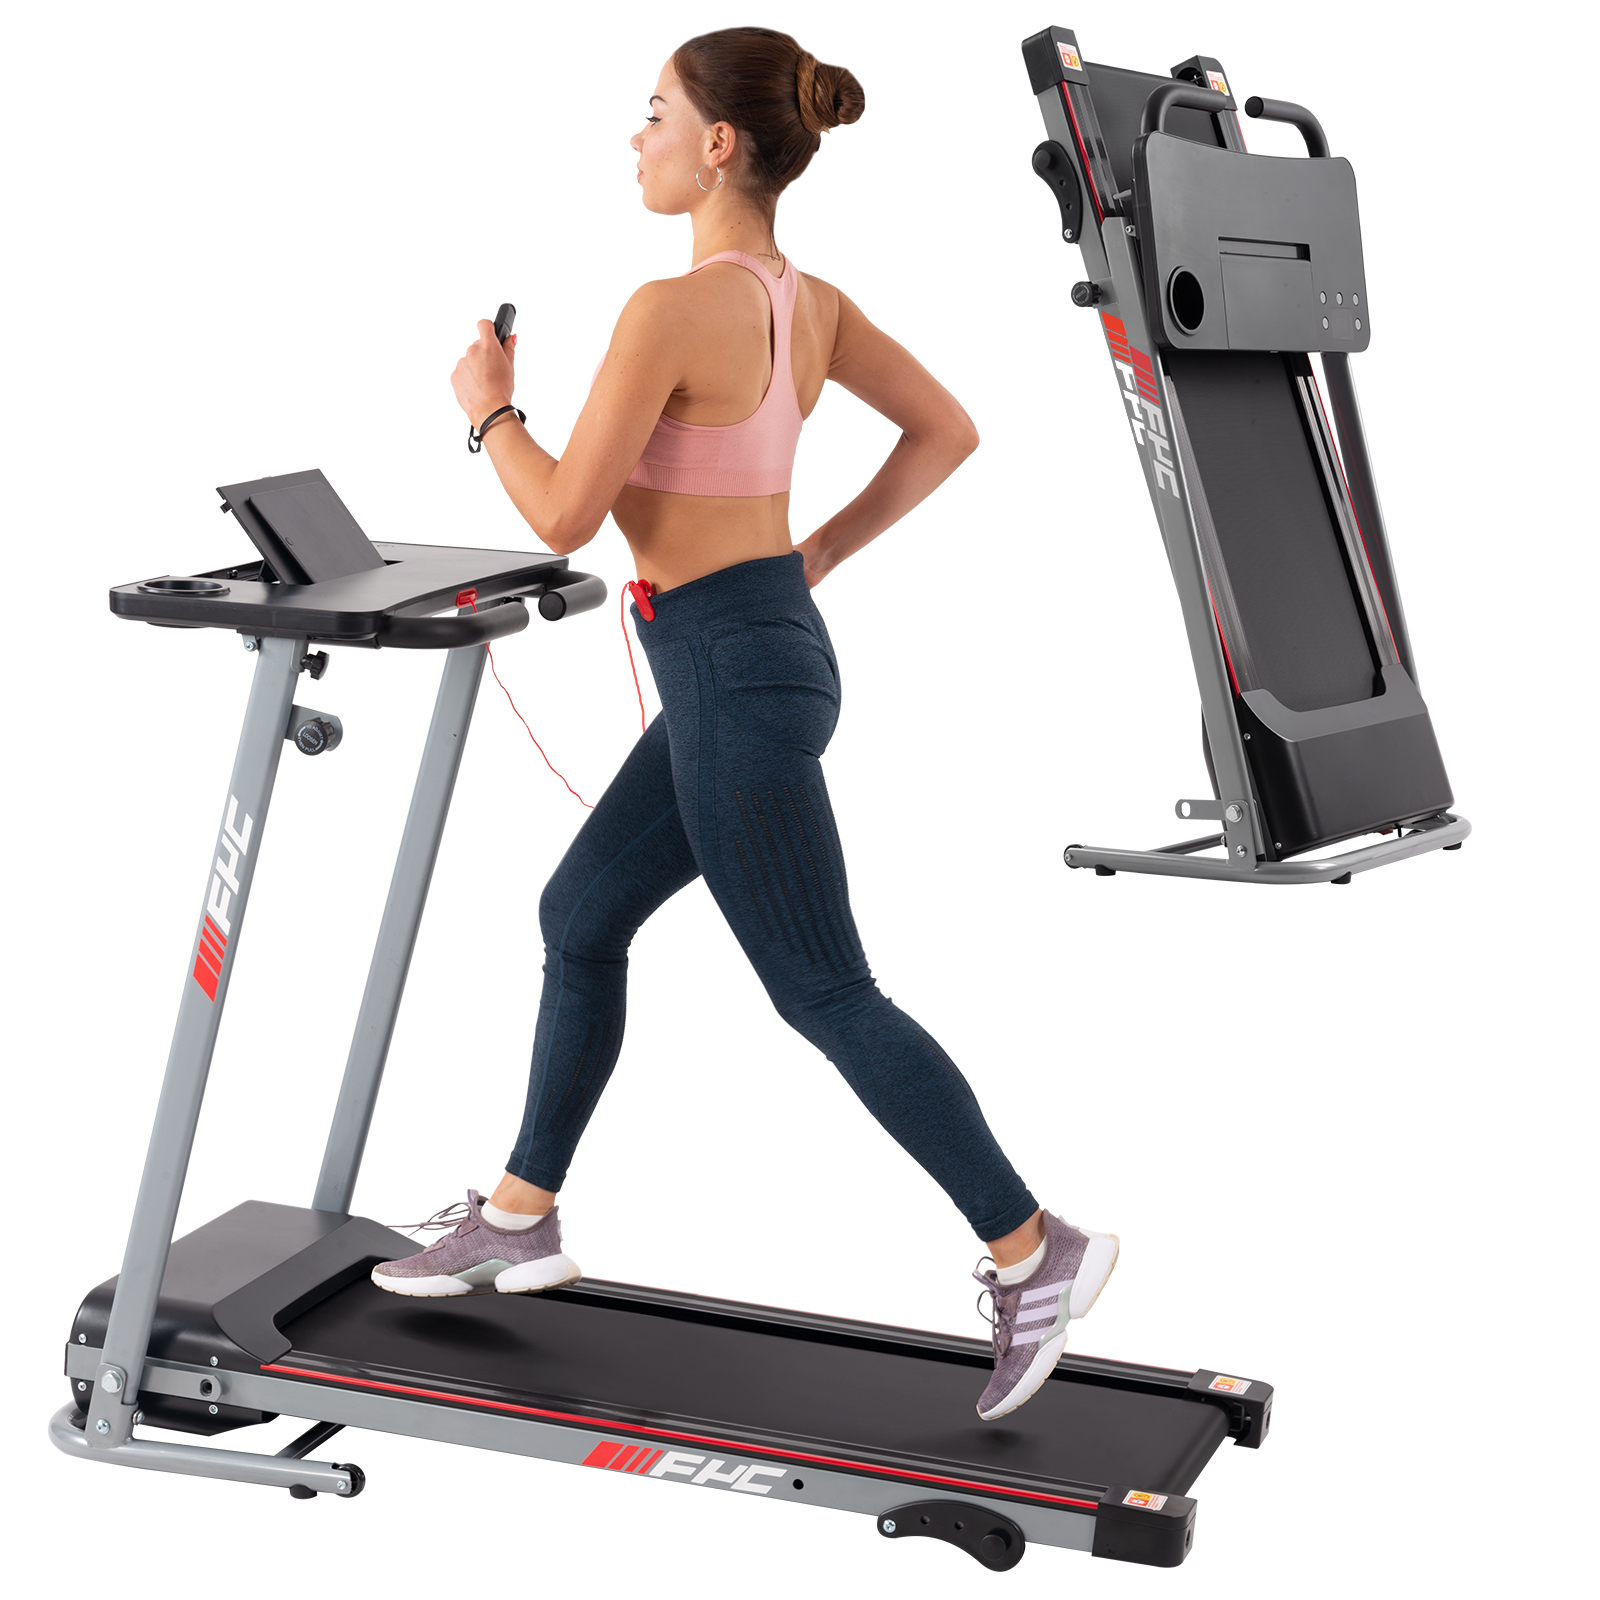 FYC Folding Treadmill for Home with Desk - 2.5HP Compact Electric Treadmill for Running and Walking Foldable Portable Running Machine for Small Spaces Workout, 265LBS Weight Capacity-Boyel Living